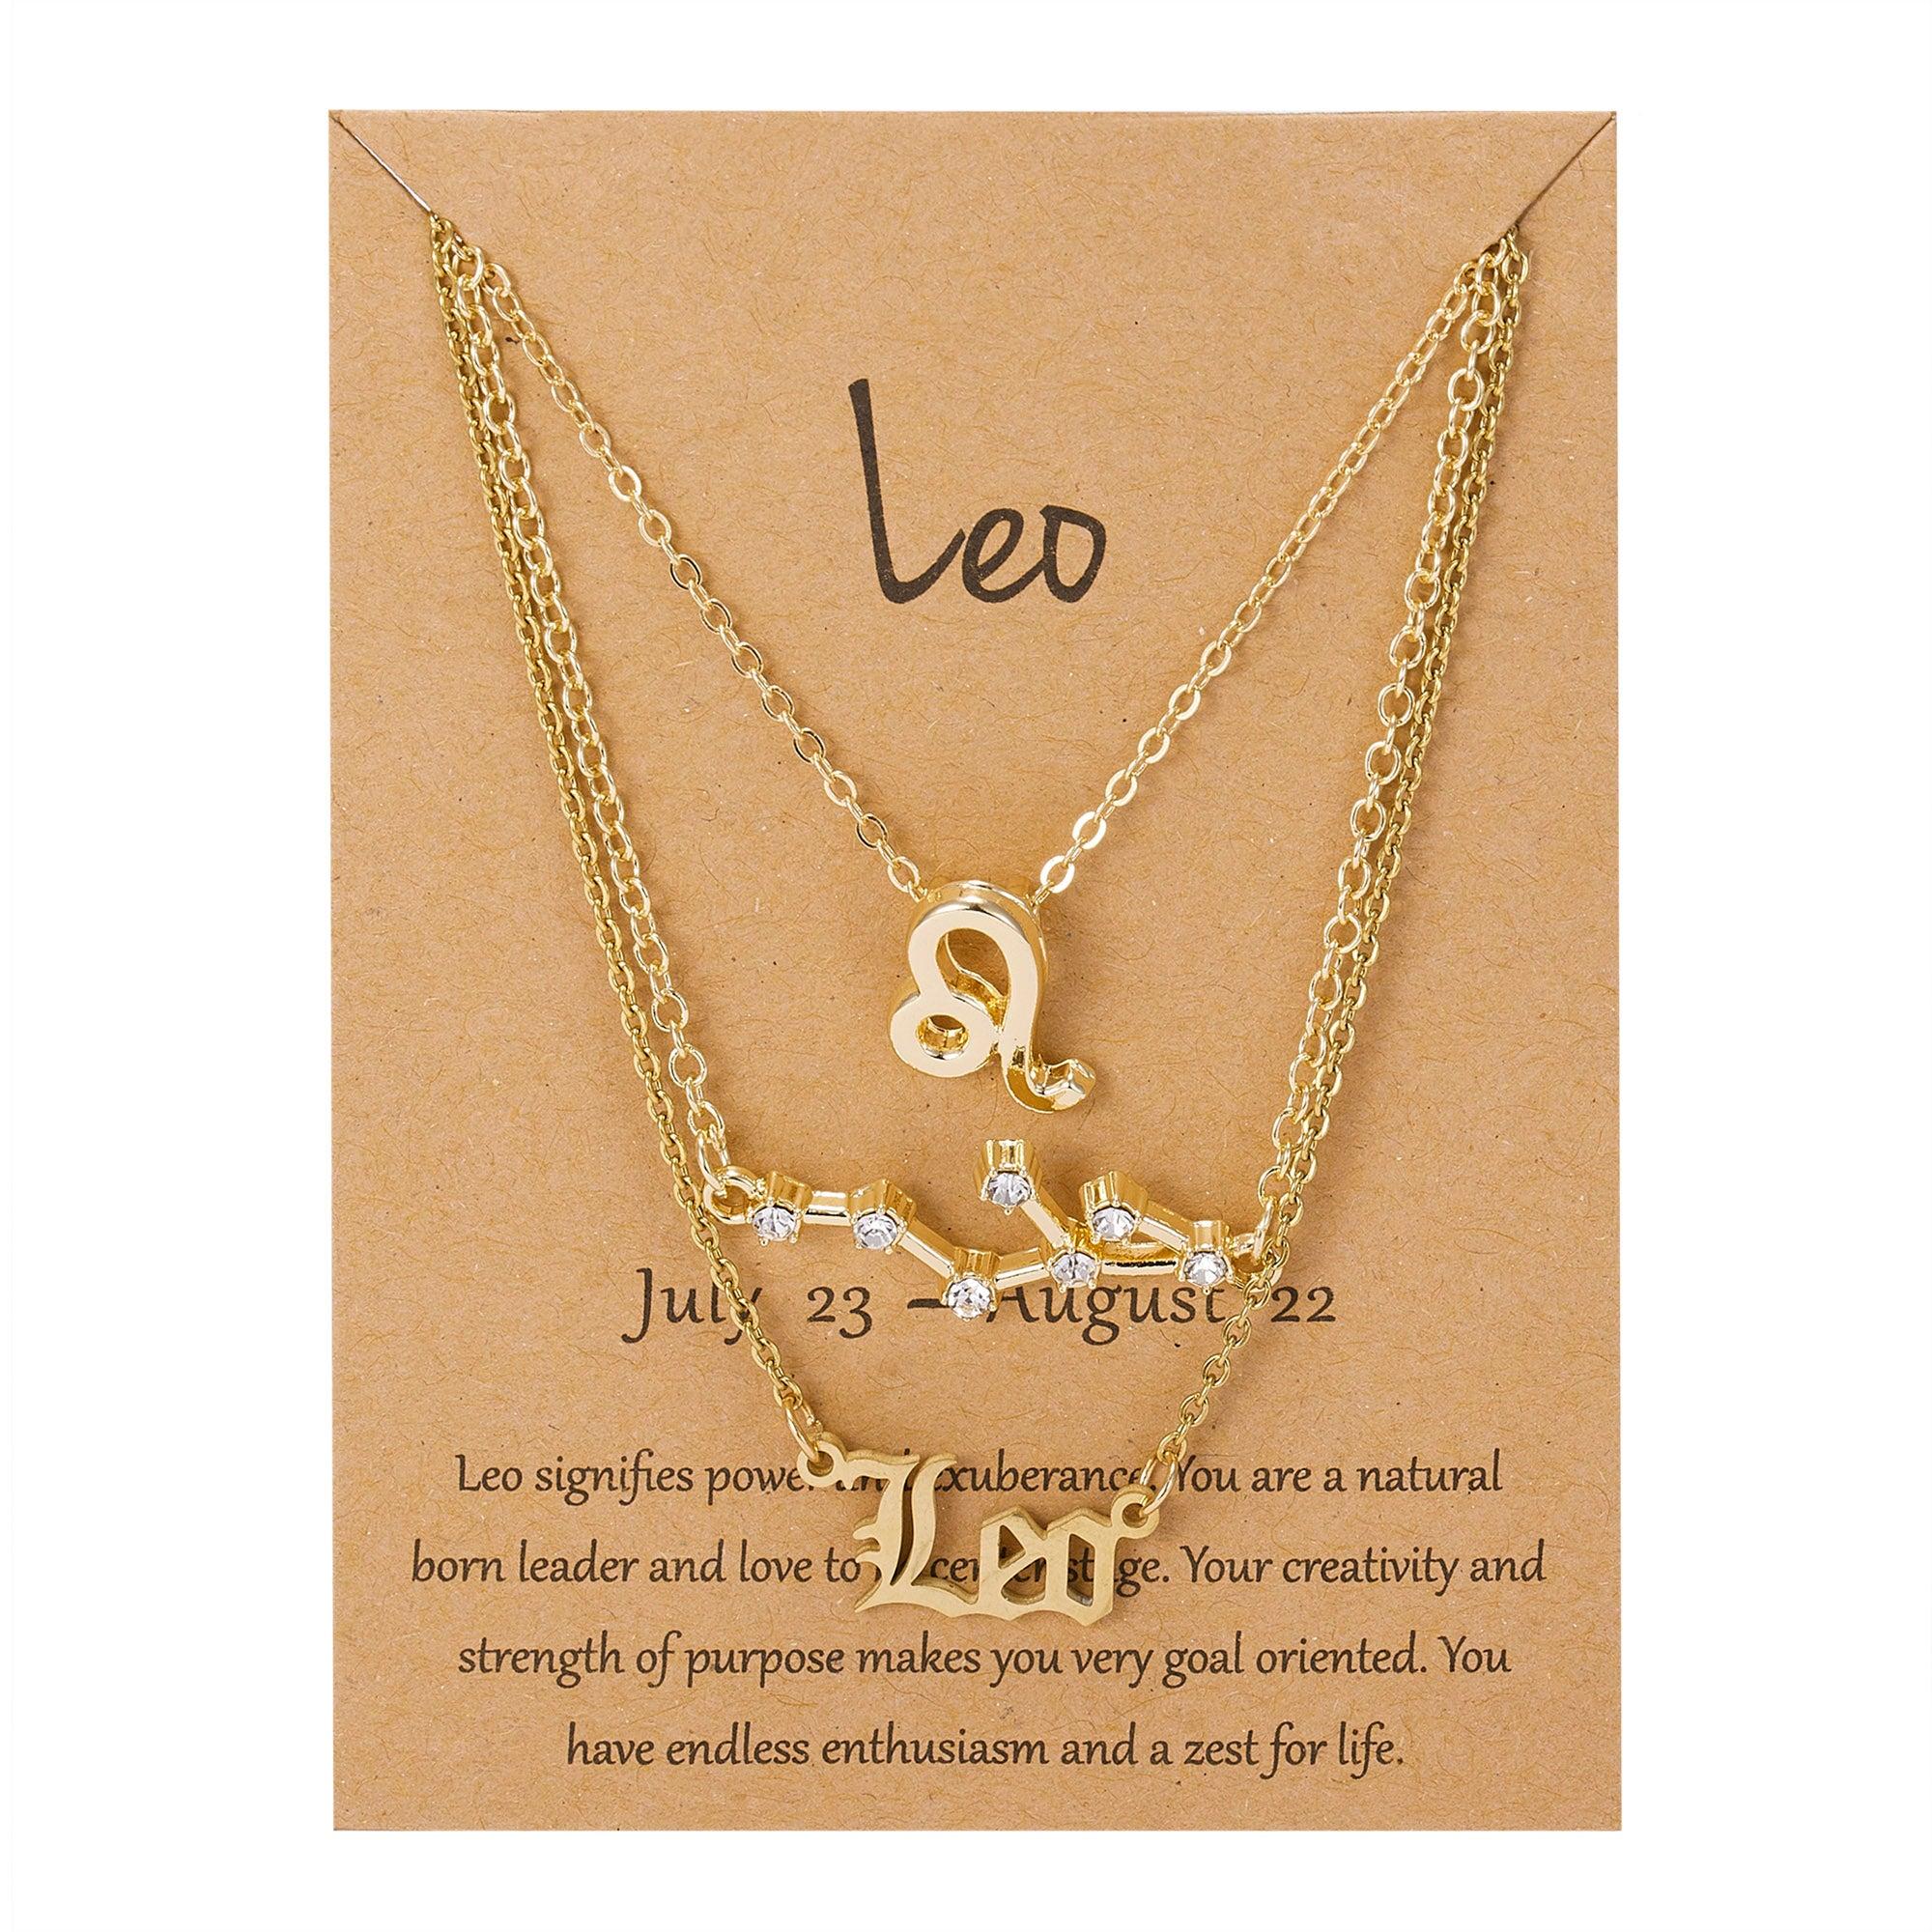 3Pcs/Set Cardboard Star Zodiac Sign Pendant Gold Color 12 Constellation Necklace Aries Cancer Leo Scorpio Necklace Jewelry Gifts - Image #7